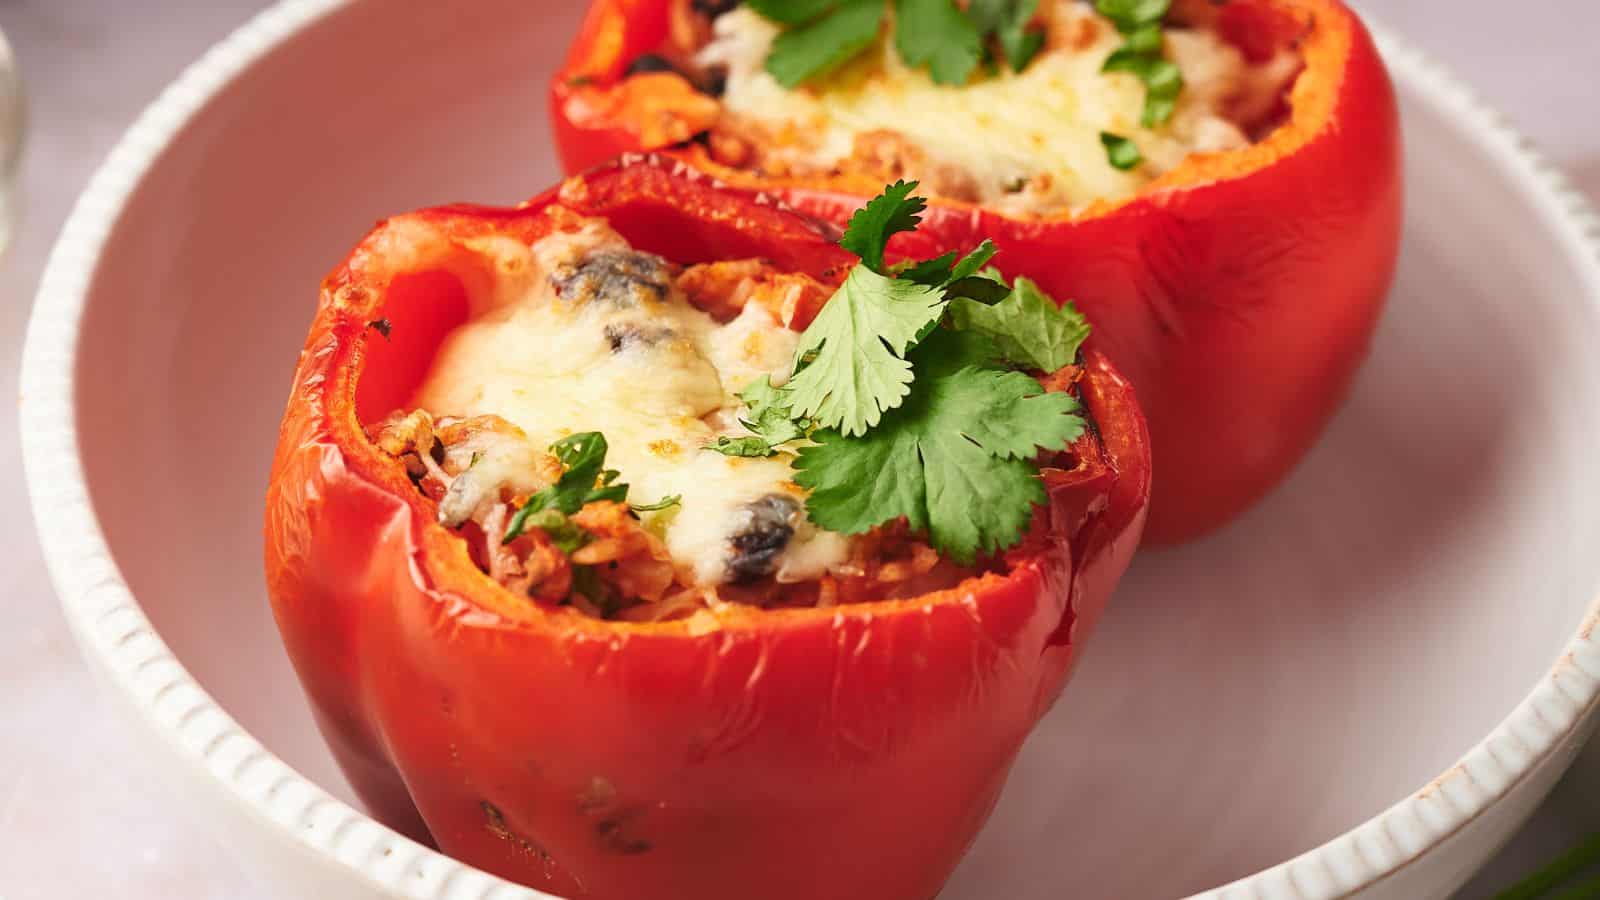 <p>Turn dinner time into fun time with the vibrant and delicious Stuffed Peppers. This fun way to sneak in veggies excites kids and let’s be honest; anything that sparks joy in kids over vegetables is a win and a relief!<br><strong>Get the Recipe: </strong><a href="https://www.splashoftaste.com/vegetarian-stuffed-peppers/?utm_source=msn&utm_medium=page&utm_campaign=msn">Stuffed Peppers</a></p>